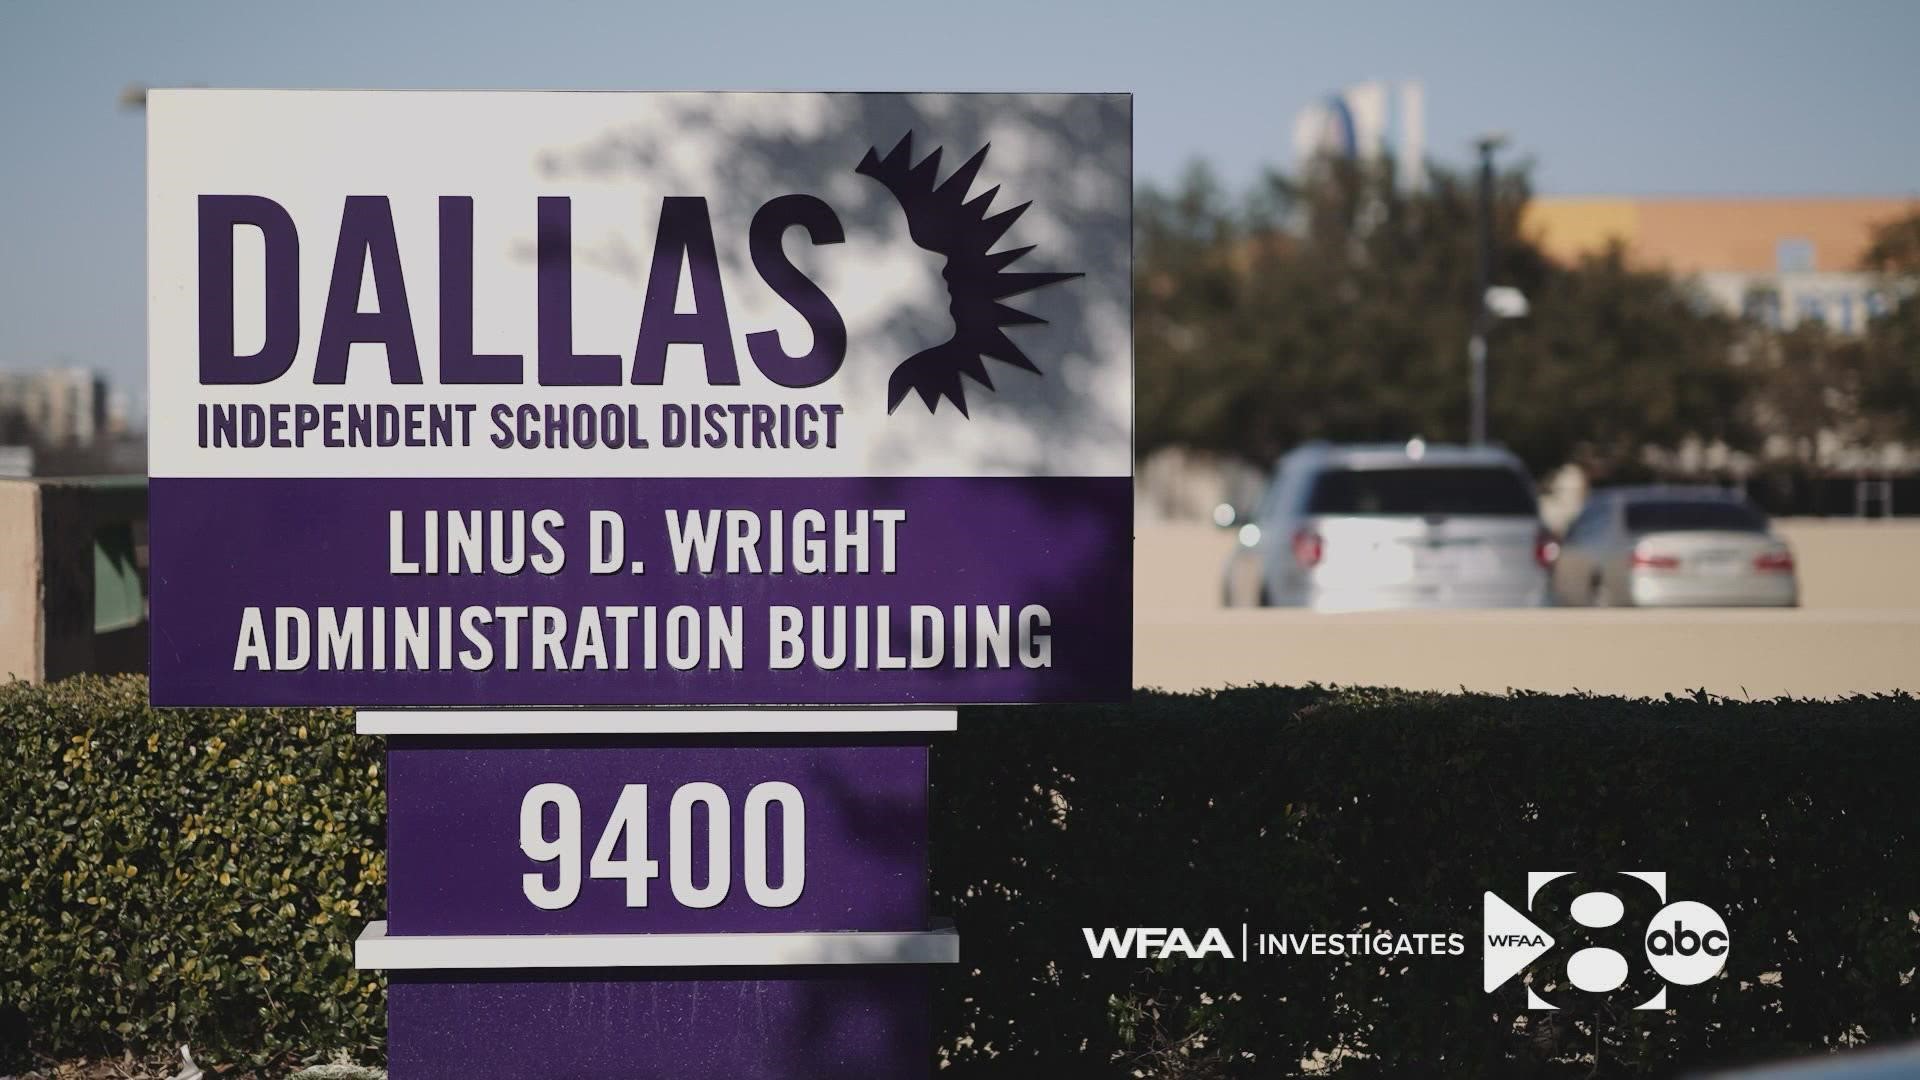 A year and a half before the breach, consultants told Dallas ISD its systems were vulnerable, but then COVID hit and it’s unclear if fixes were made.